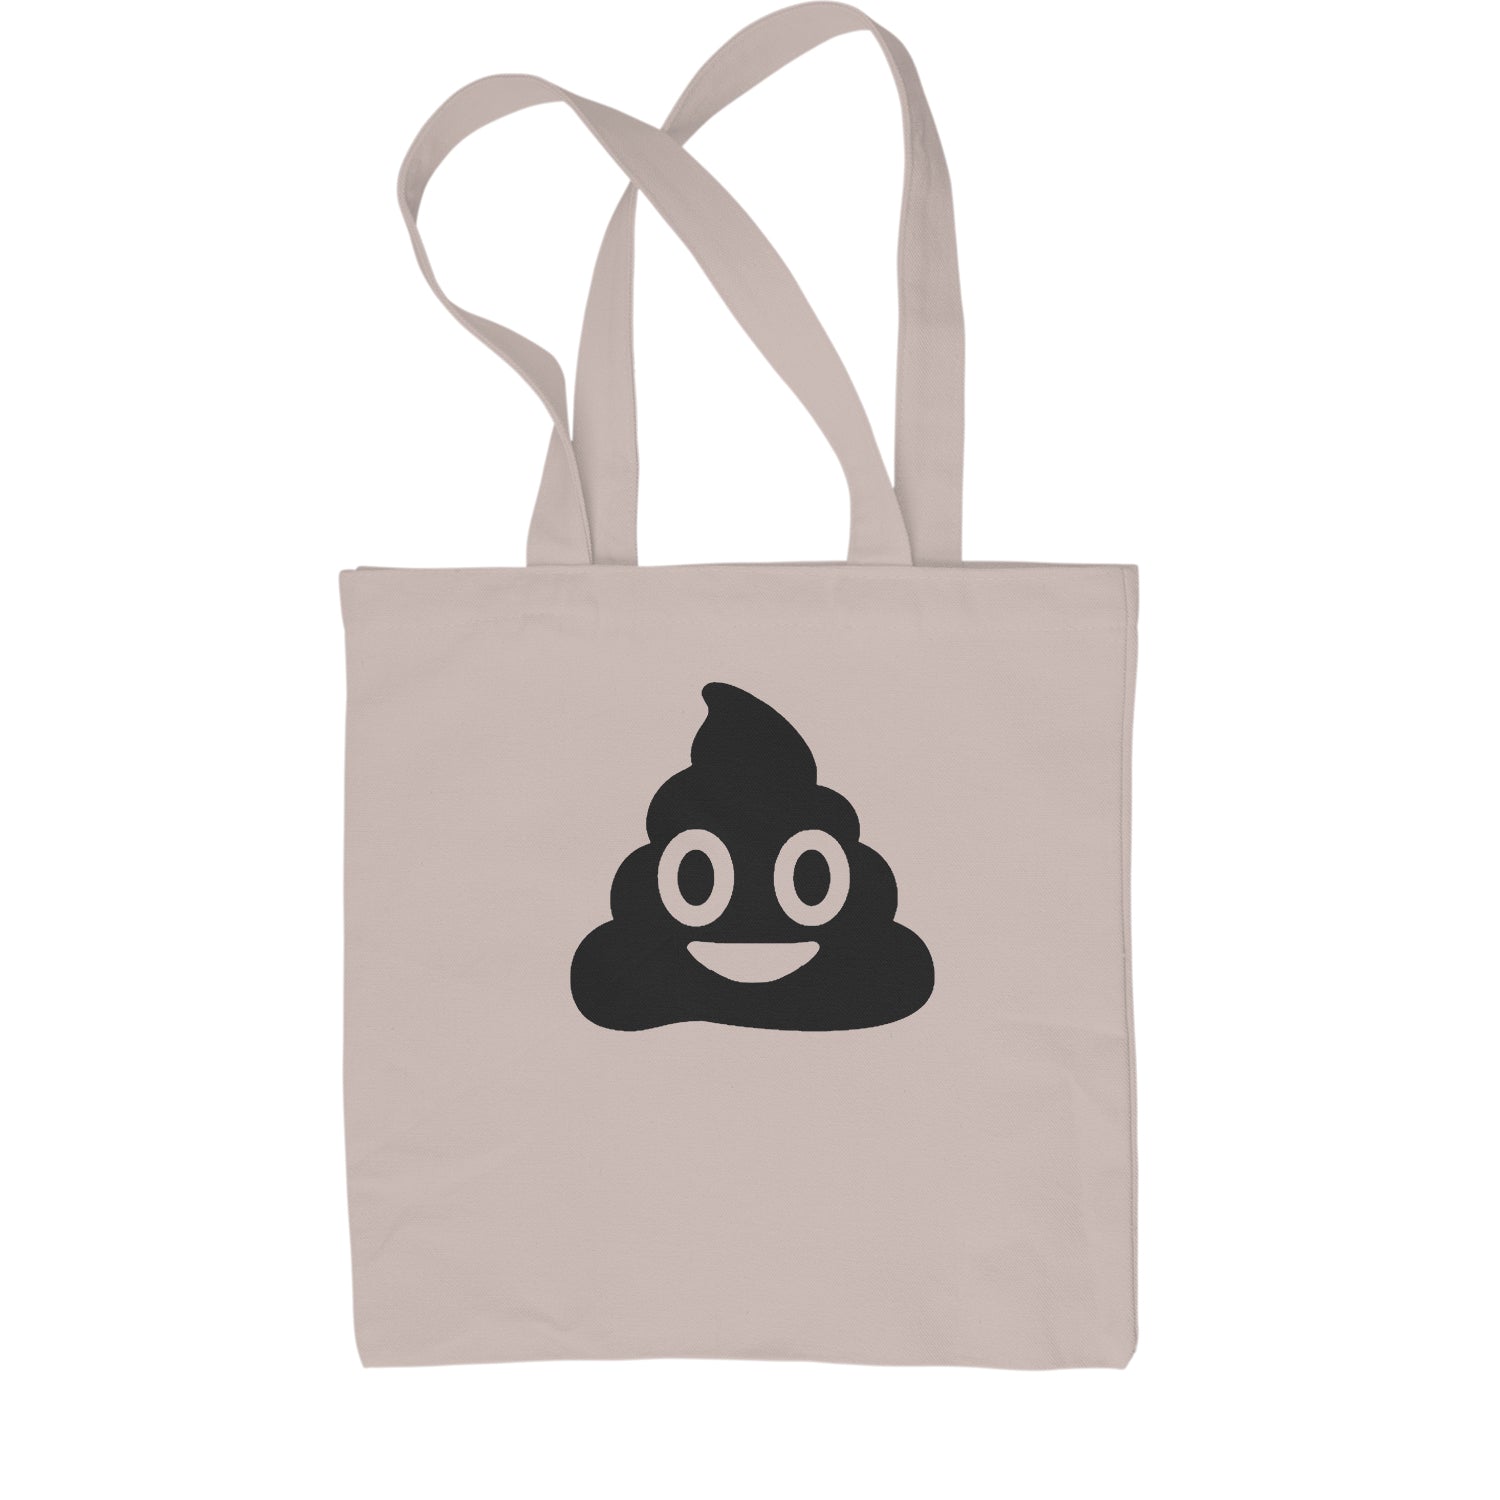 Emoticon Poop Face Smile Face Shopping Tote Bag cosplay, costume, dress, emoji, emote, face, halloween, smiley, up, yellow by Expression Tees